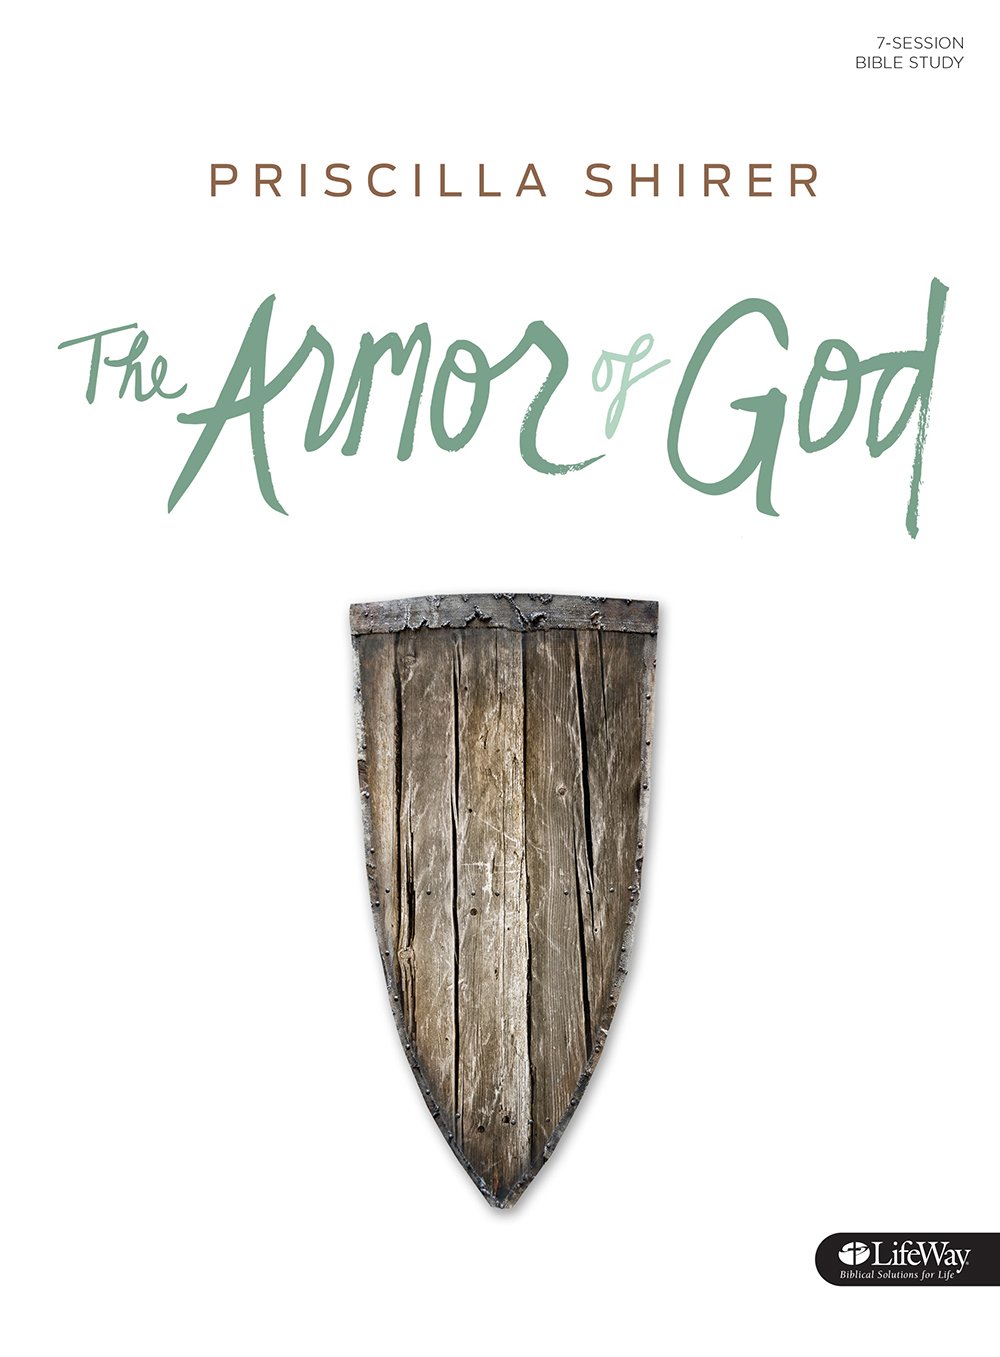 The Illustrating Bible Review! + The Armor of God